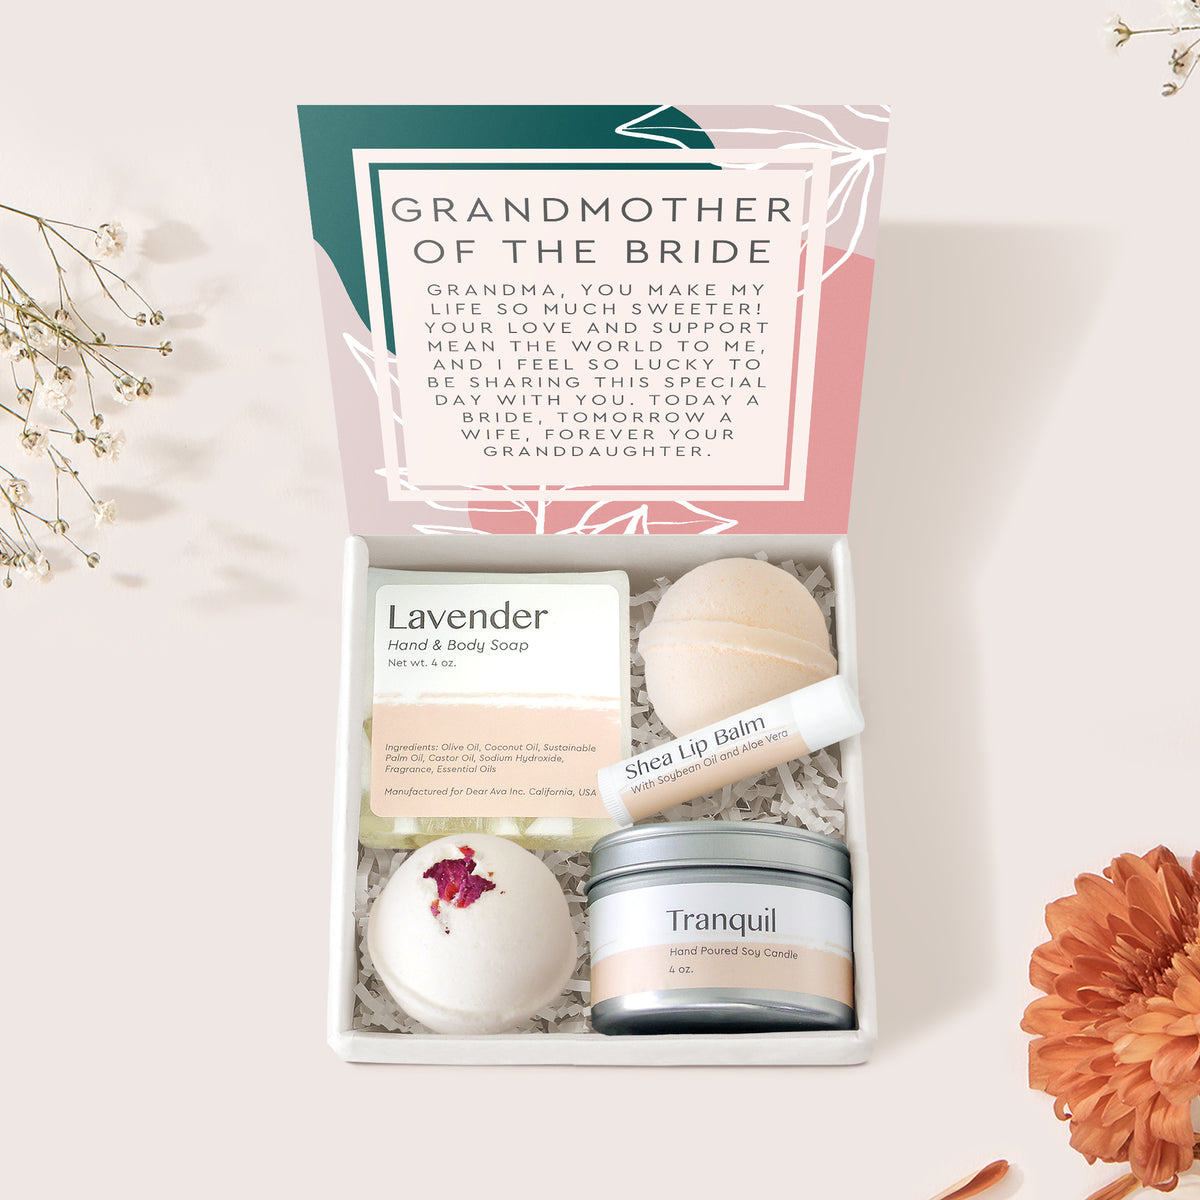 Grandmother of the Bride Spa Gift Box